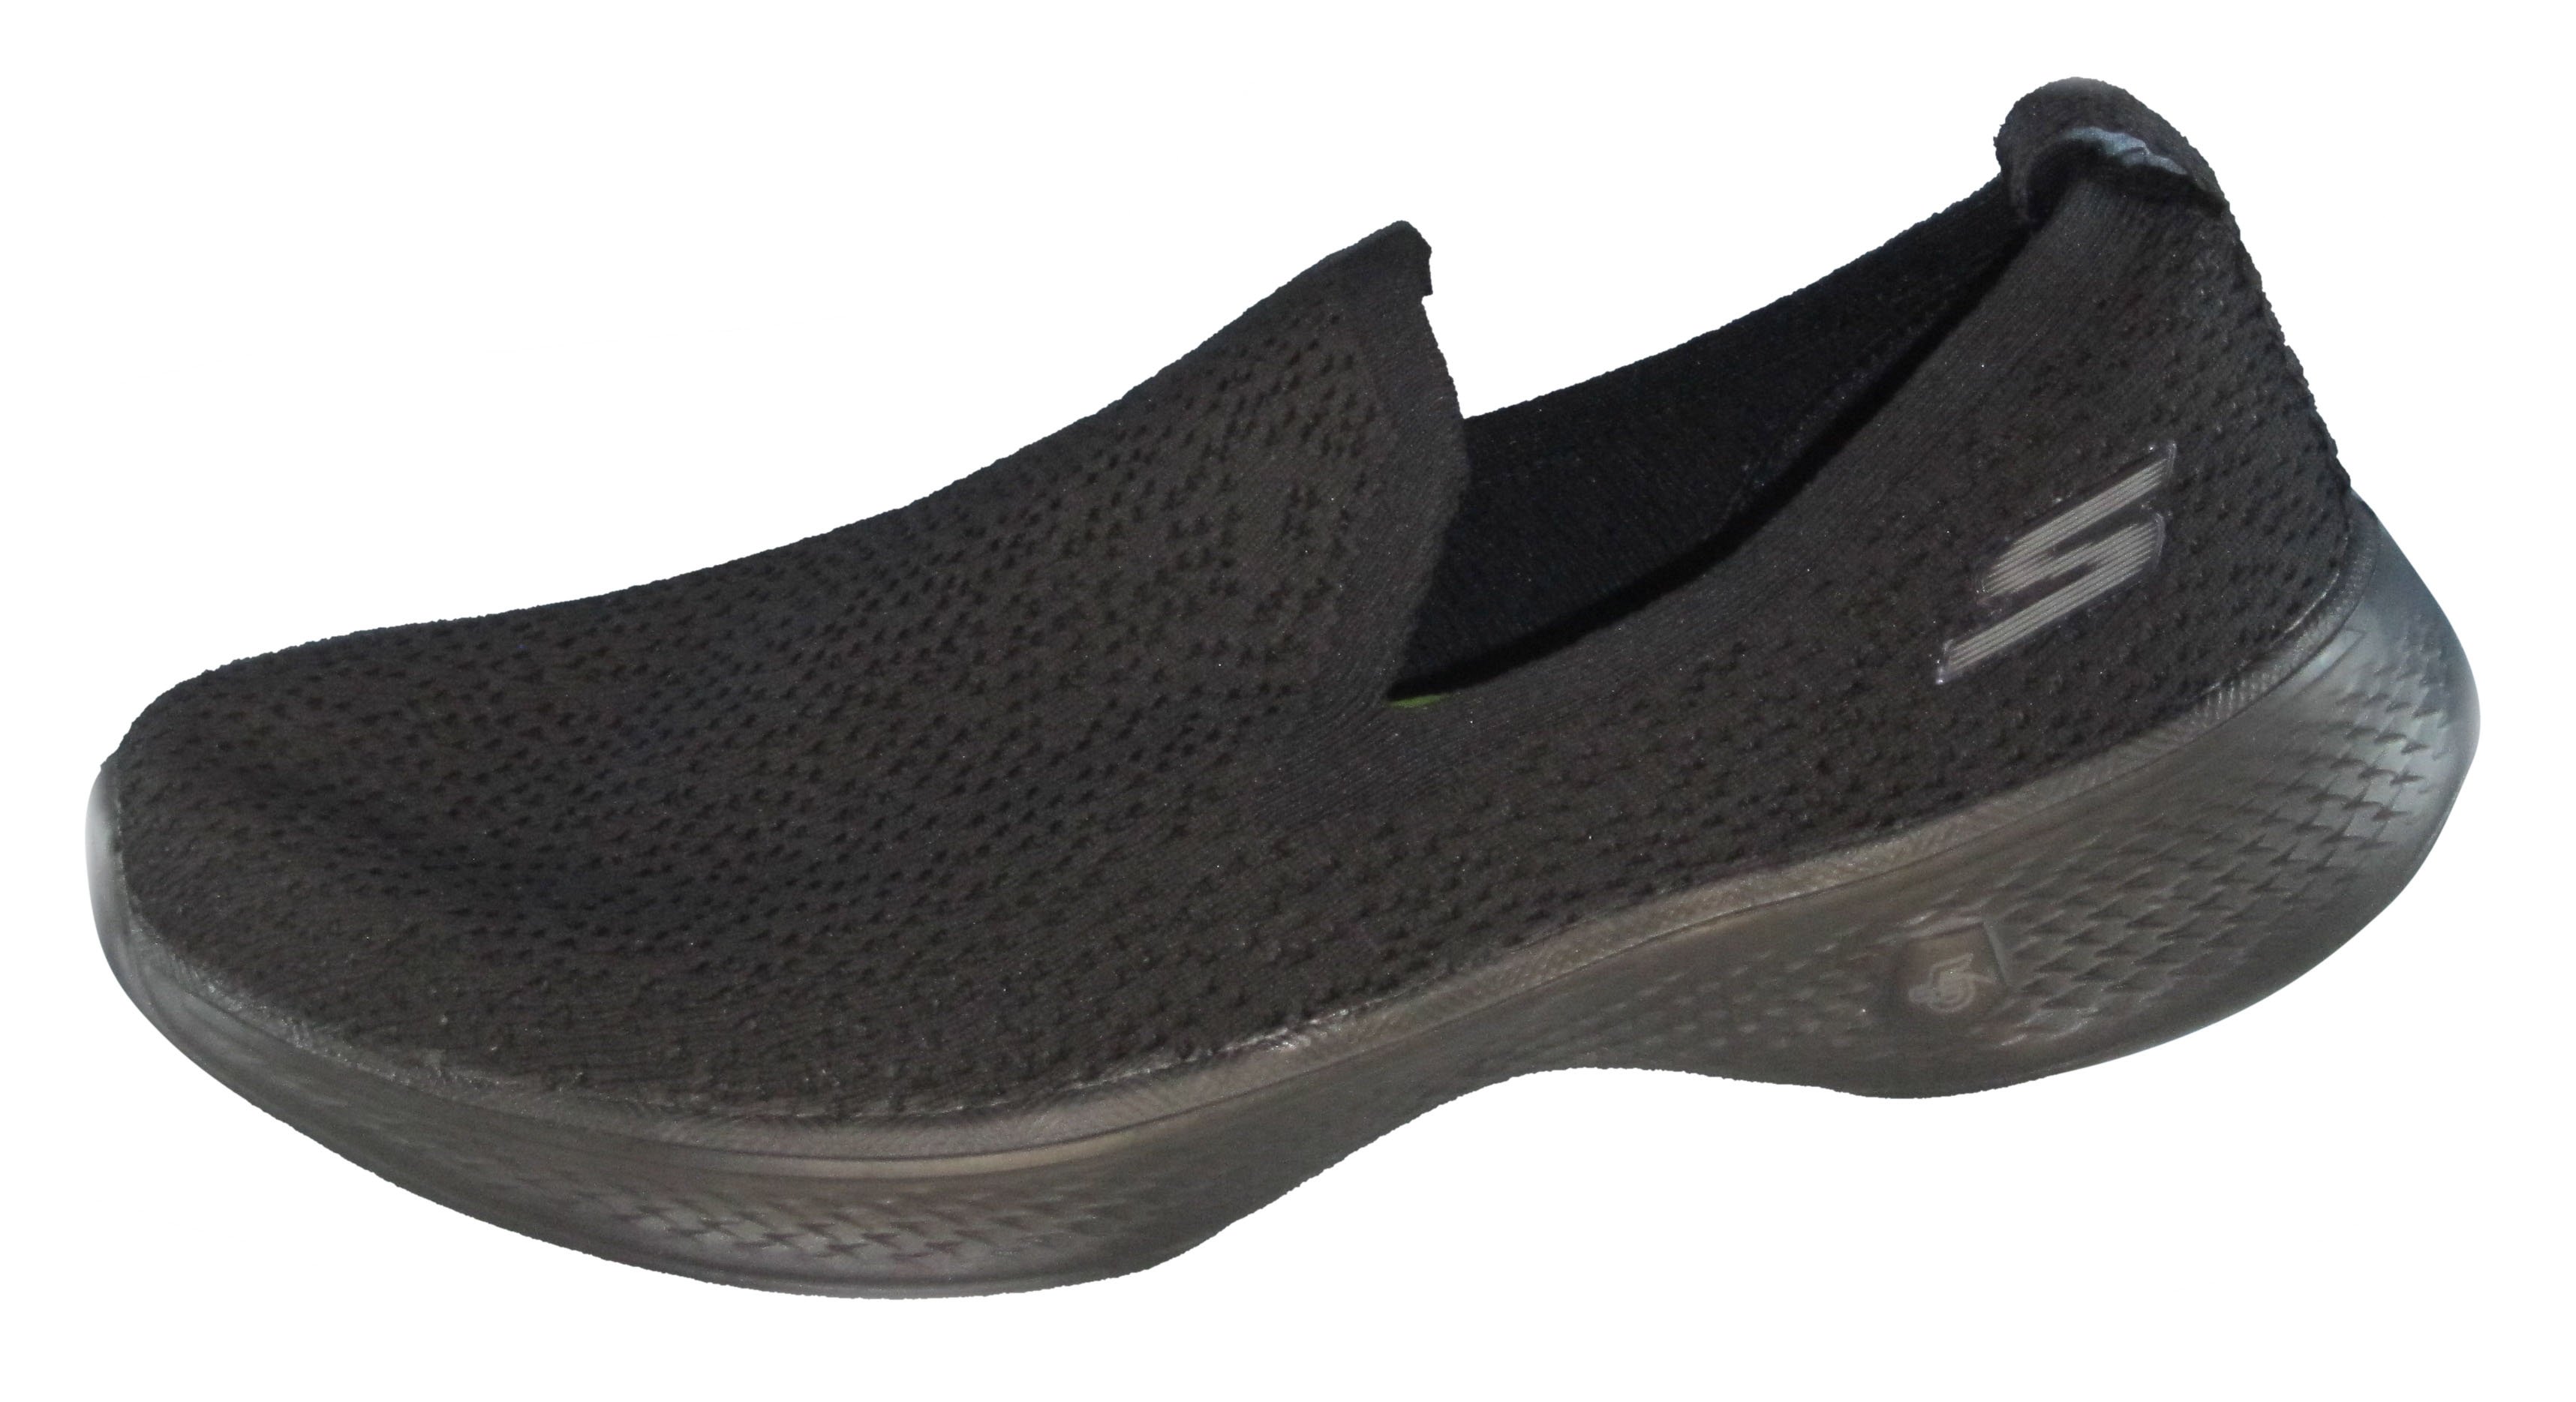 14918 - GO WALK 4 - GIFTED SKECHERS - WOMENS SHOES-SCUFFS & SLIDES ...